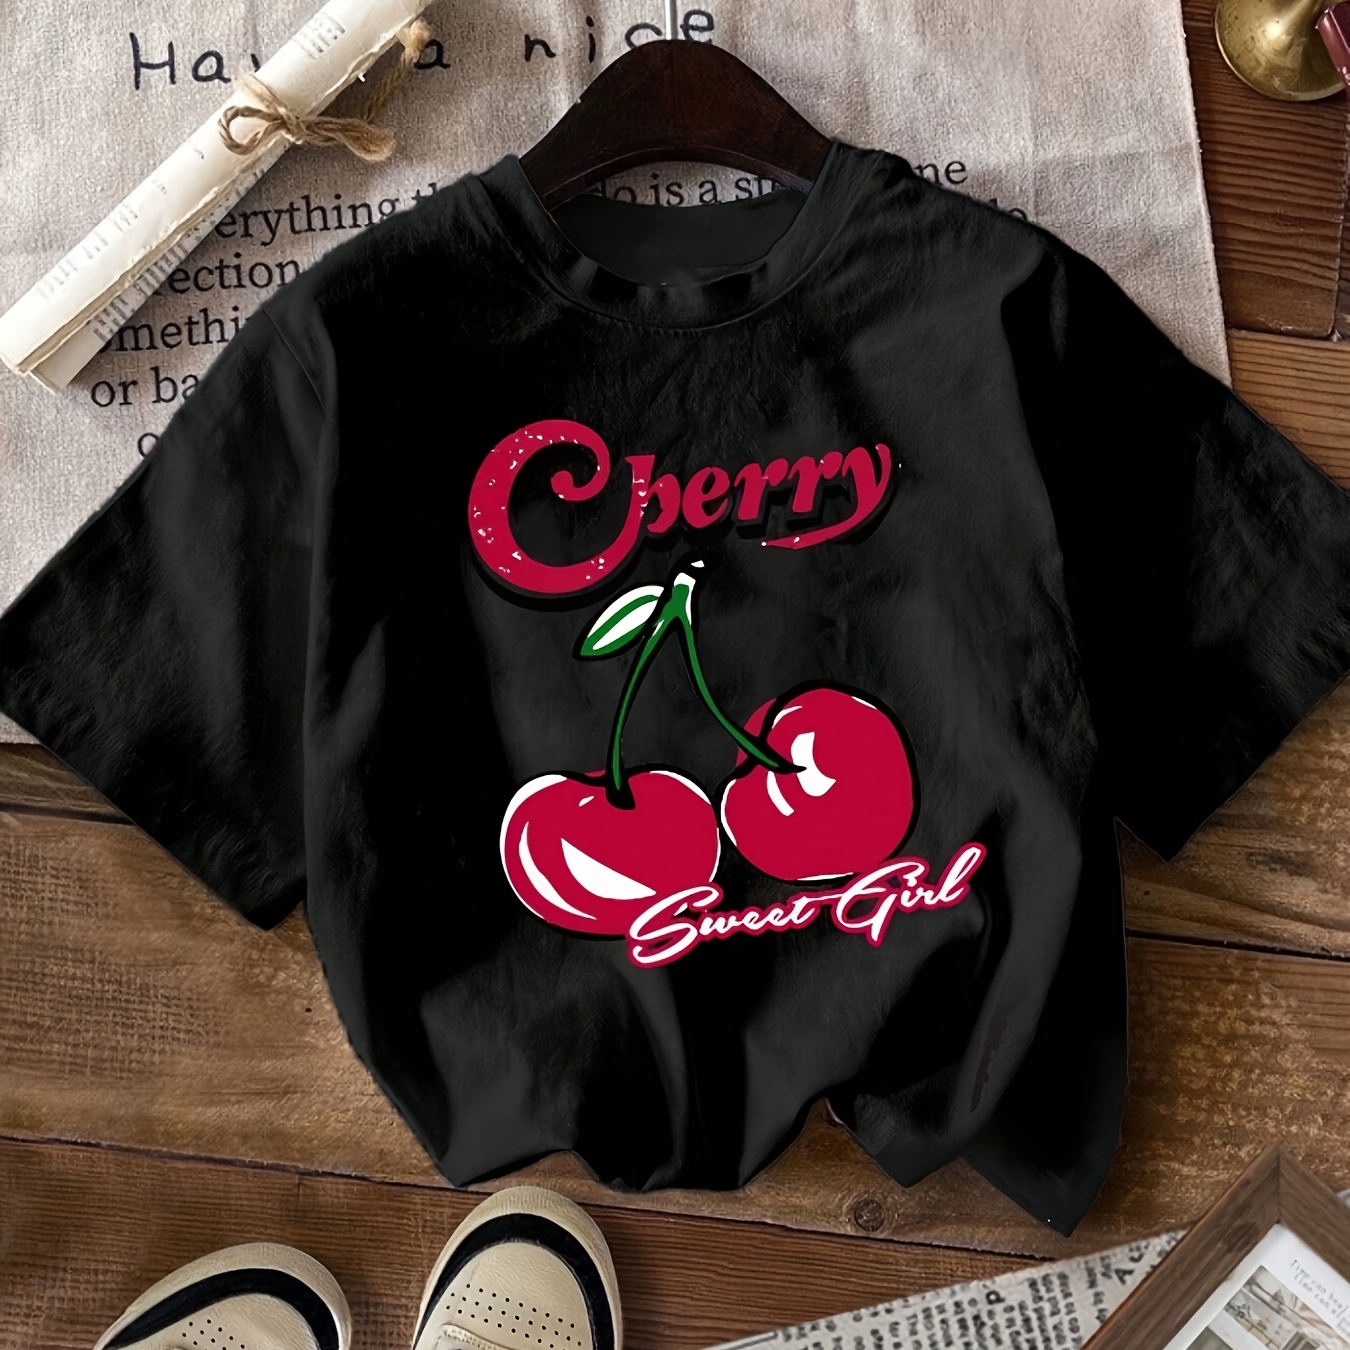 

Letter & Cherry Print T-shirt, Short Sleeve Crew Neck Casual Top For Summer & Spring, Women's Clothing